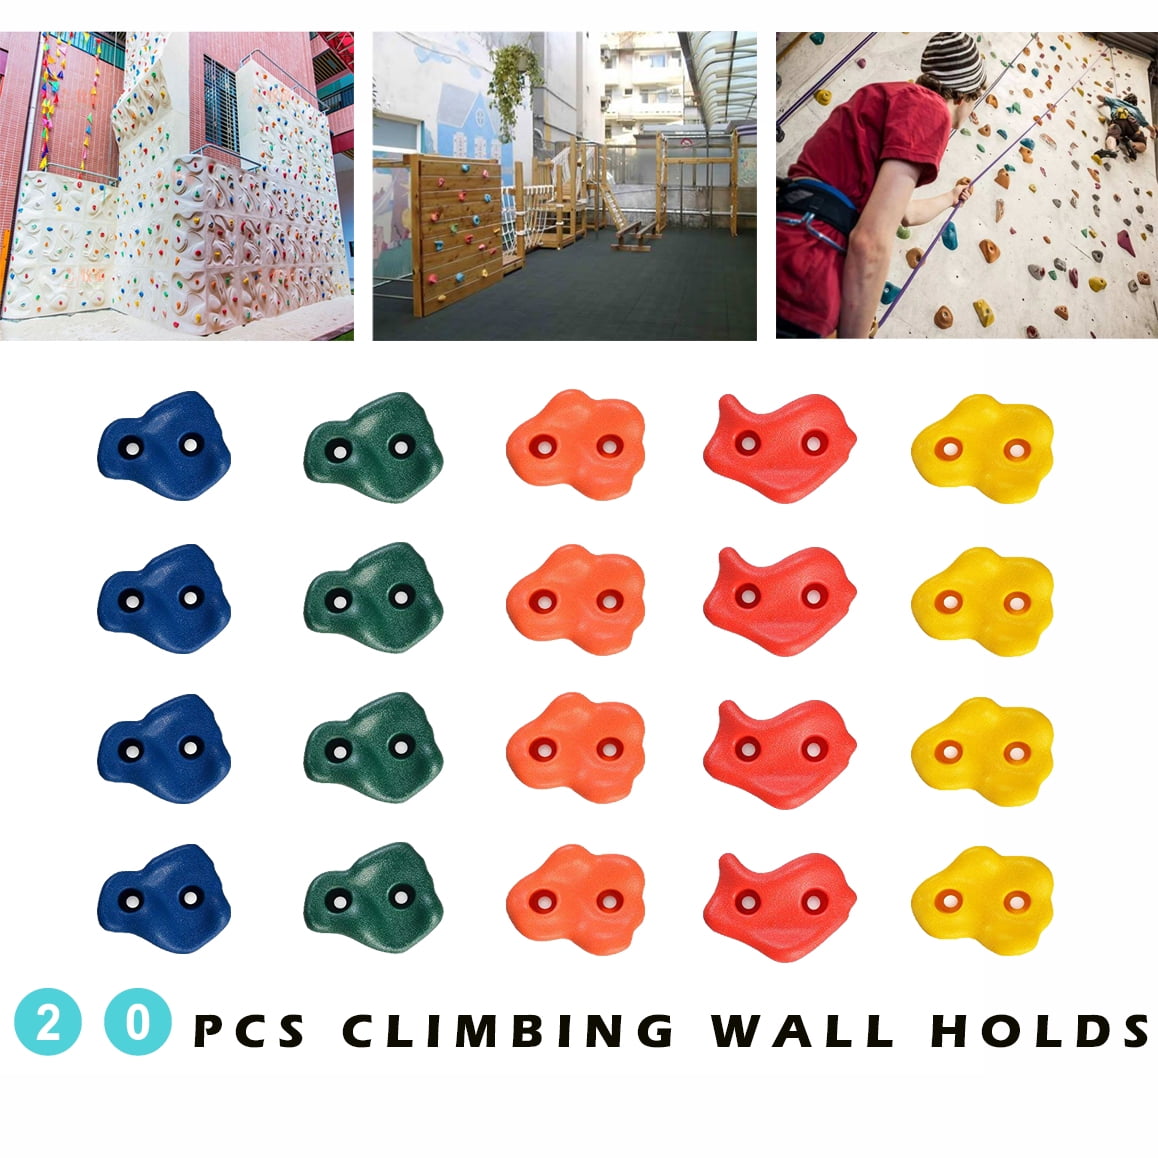 20pcs Textured Climbing Holds Rock Wall Stones Holds Grip For Kid Indoor Outdoor 